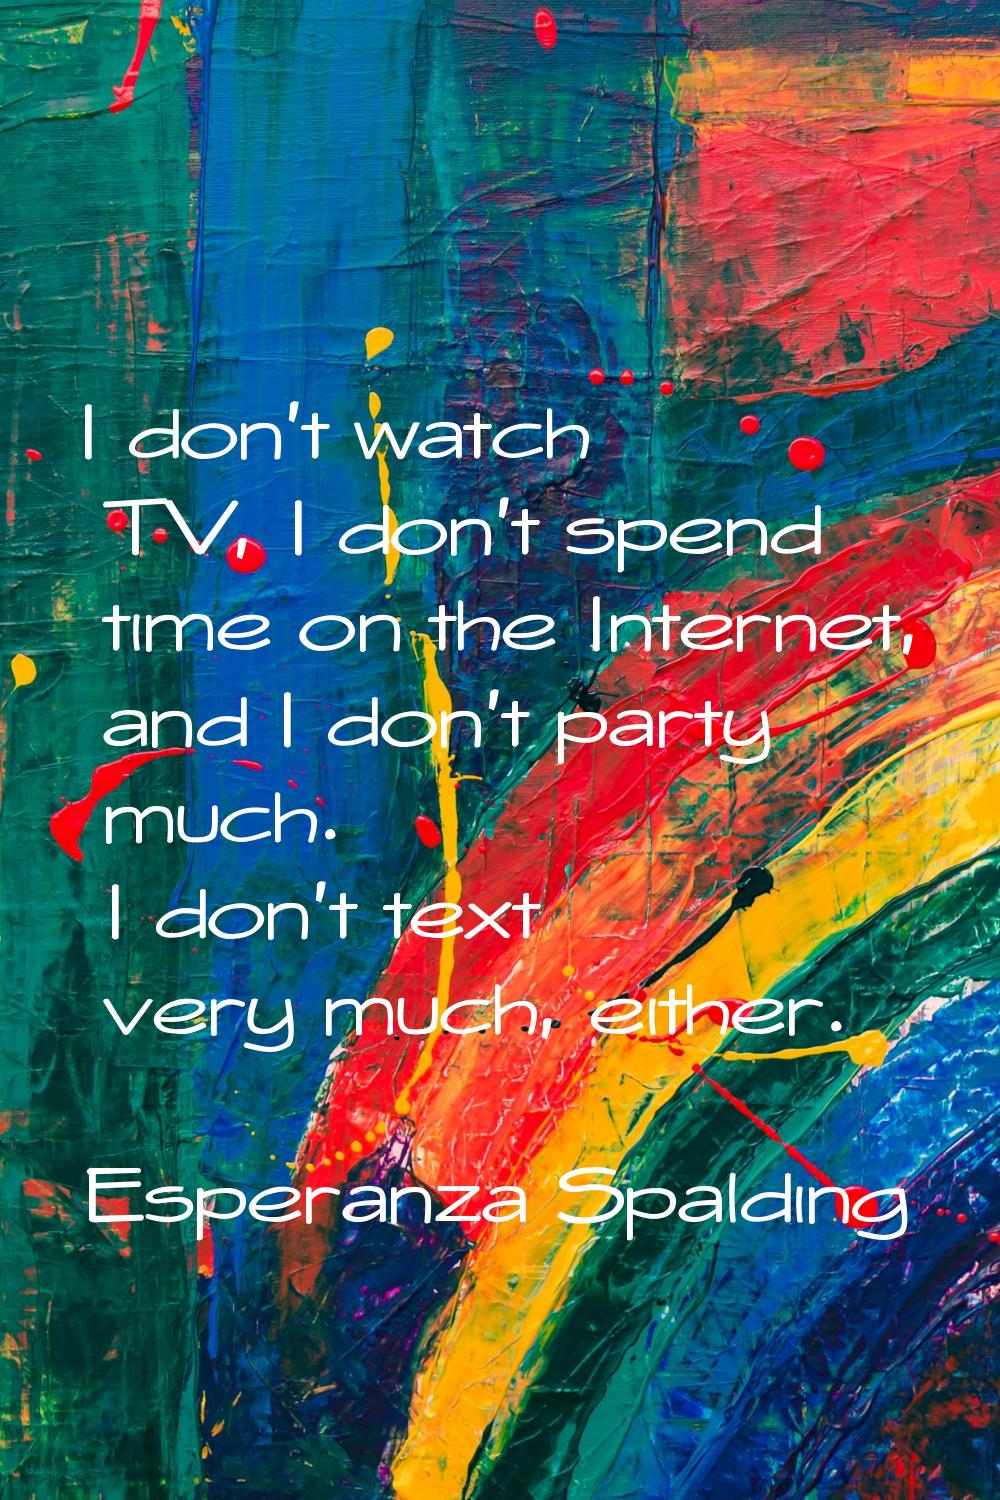 I don't watch TV, I don't spend time on the Internet, and I don't party much. I don't text very muc